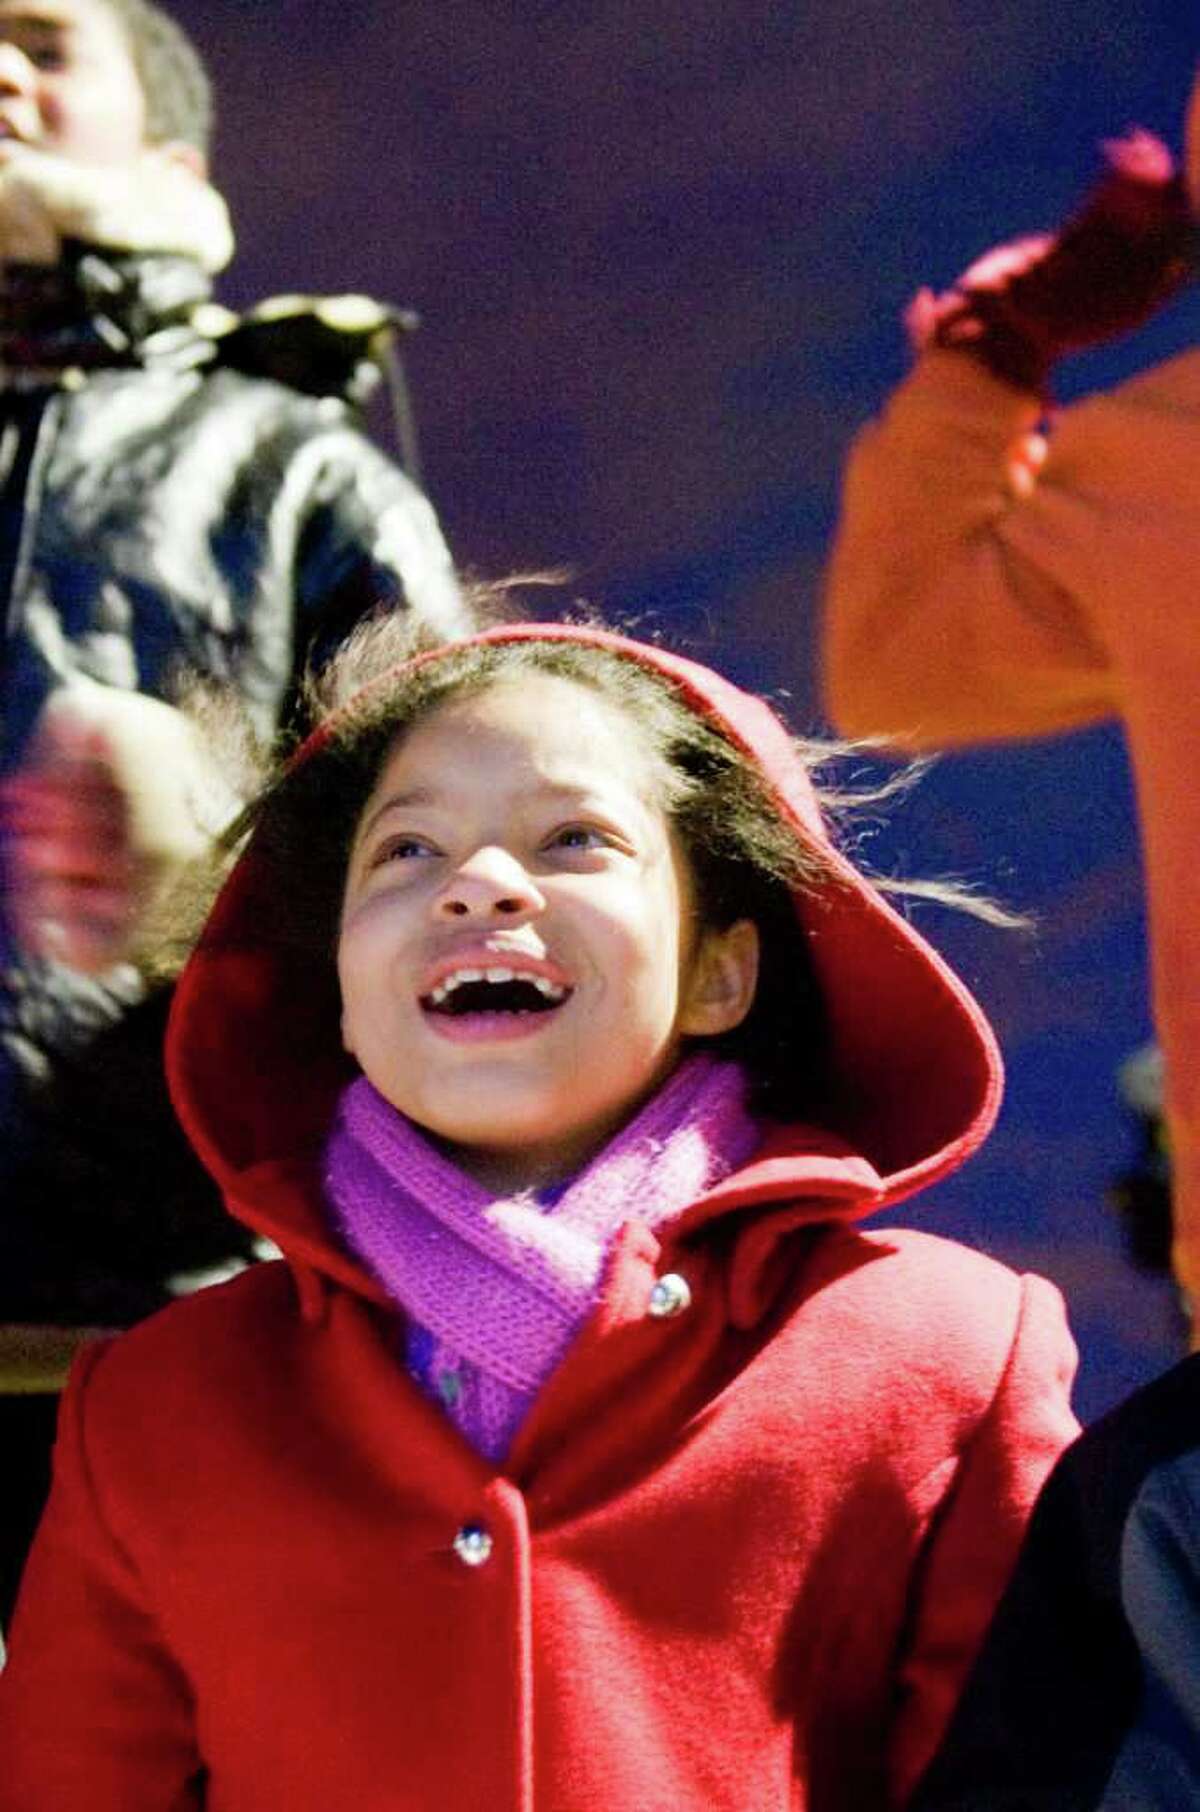 The Waterside School's Sarah Gordon, front row left, Olivia Davis and Charles Tate react to the tree lighting as Building and Land Technology, the developer of Harbor Point, hosts a tree-lighting ceremony for the first time in Commons Park, a public space newly built as part of Harbor Point in Stamford, Conn., Monday, December 6, 2010.